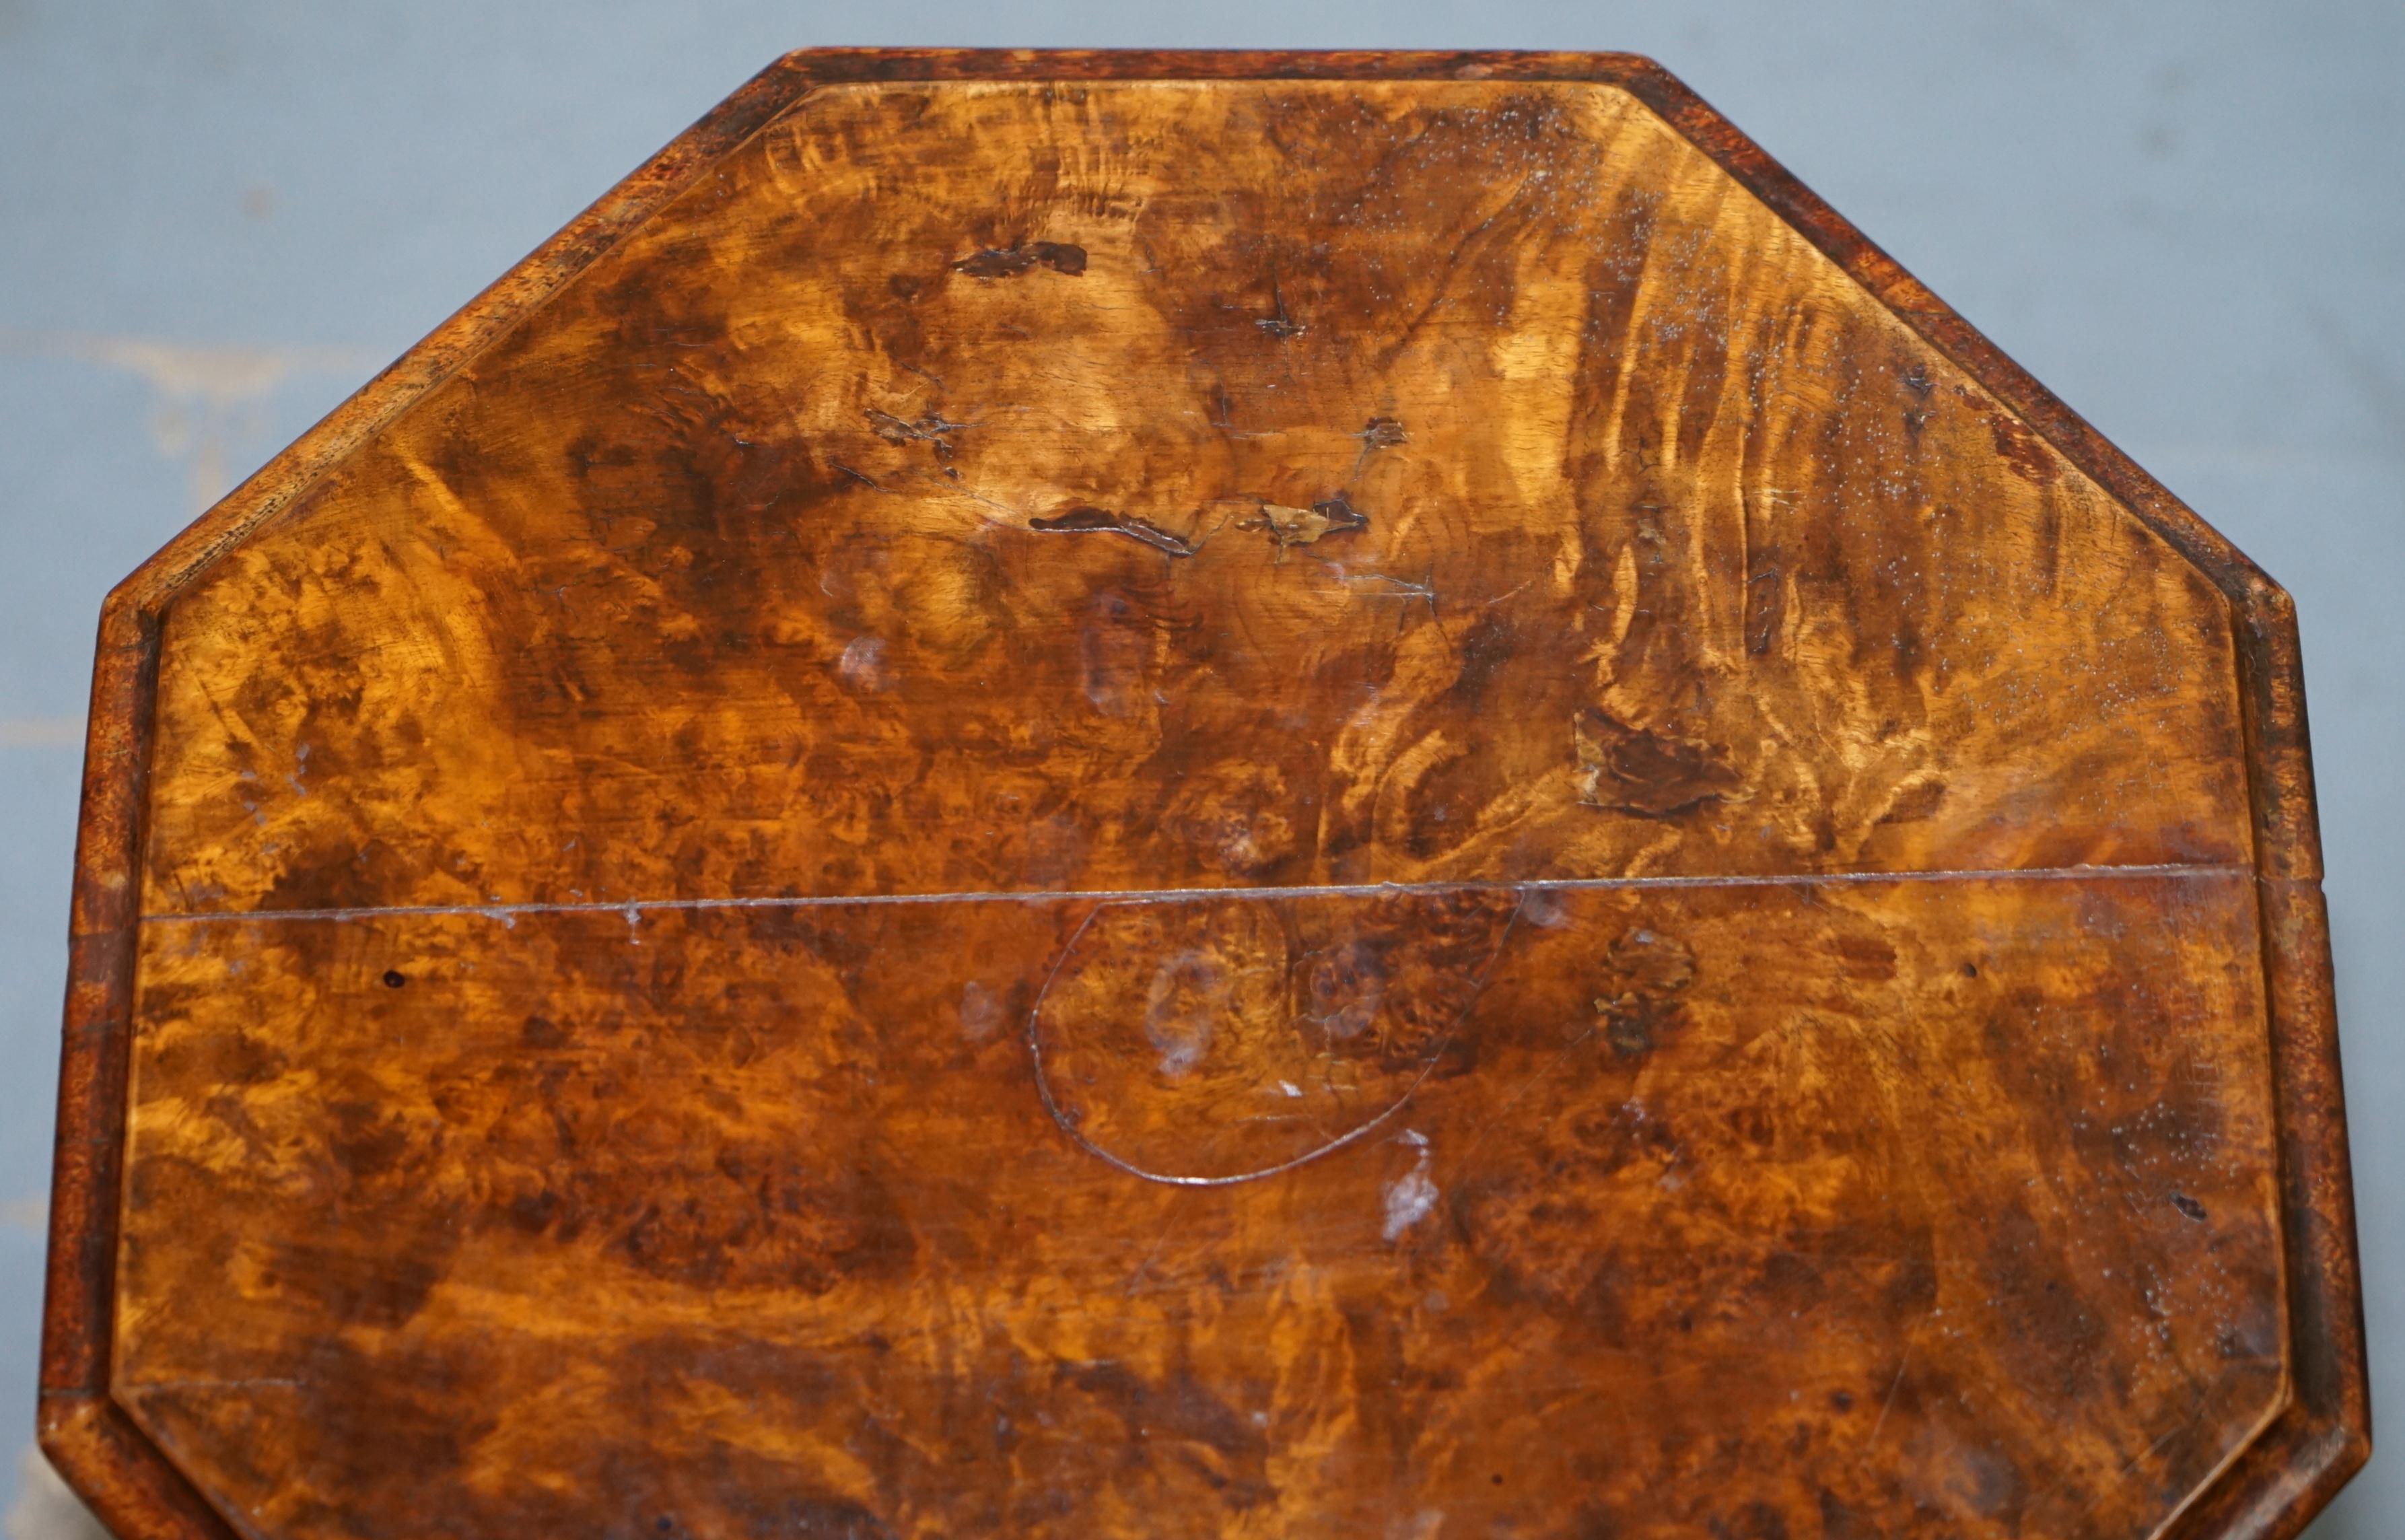 English Stunning Burr Walnut Victorian Sewing or Work Box Great as Side Lamp End Table